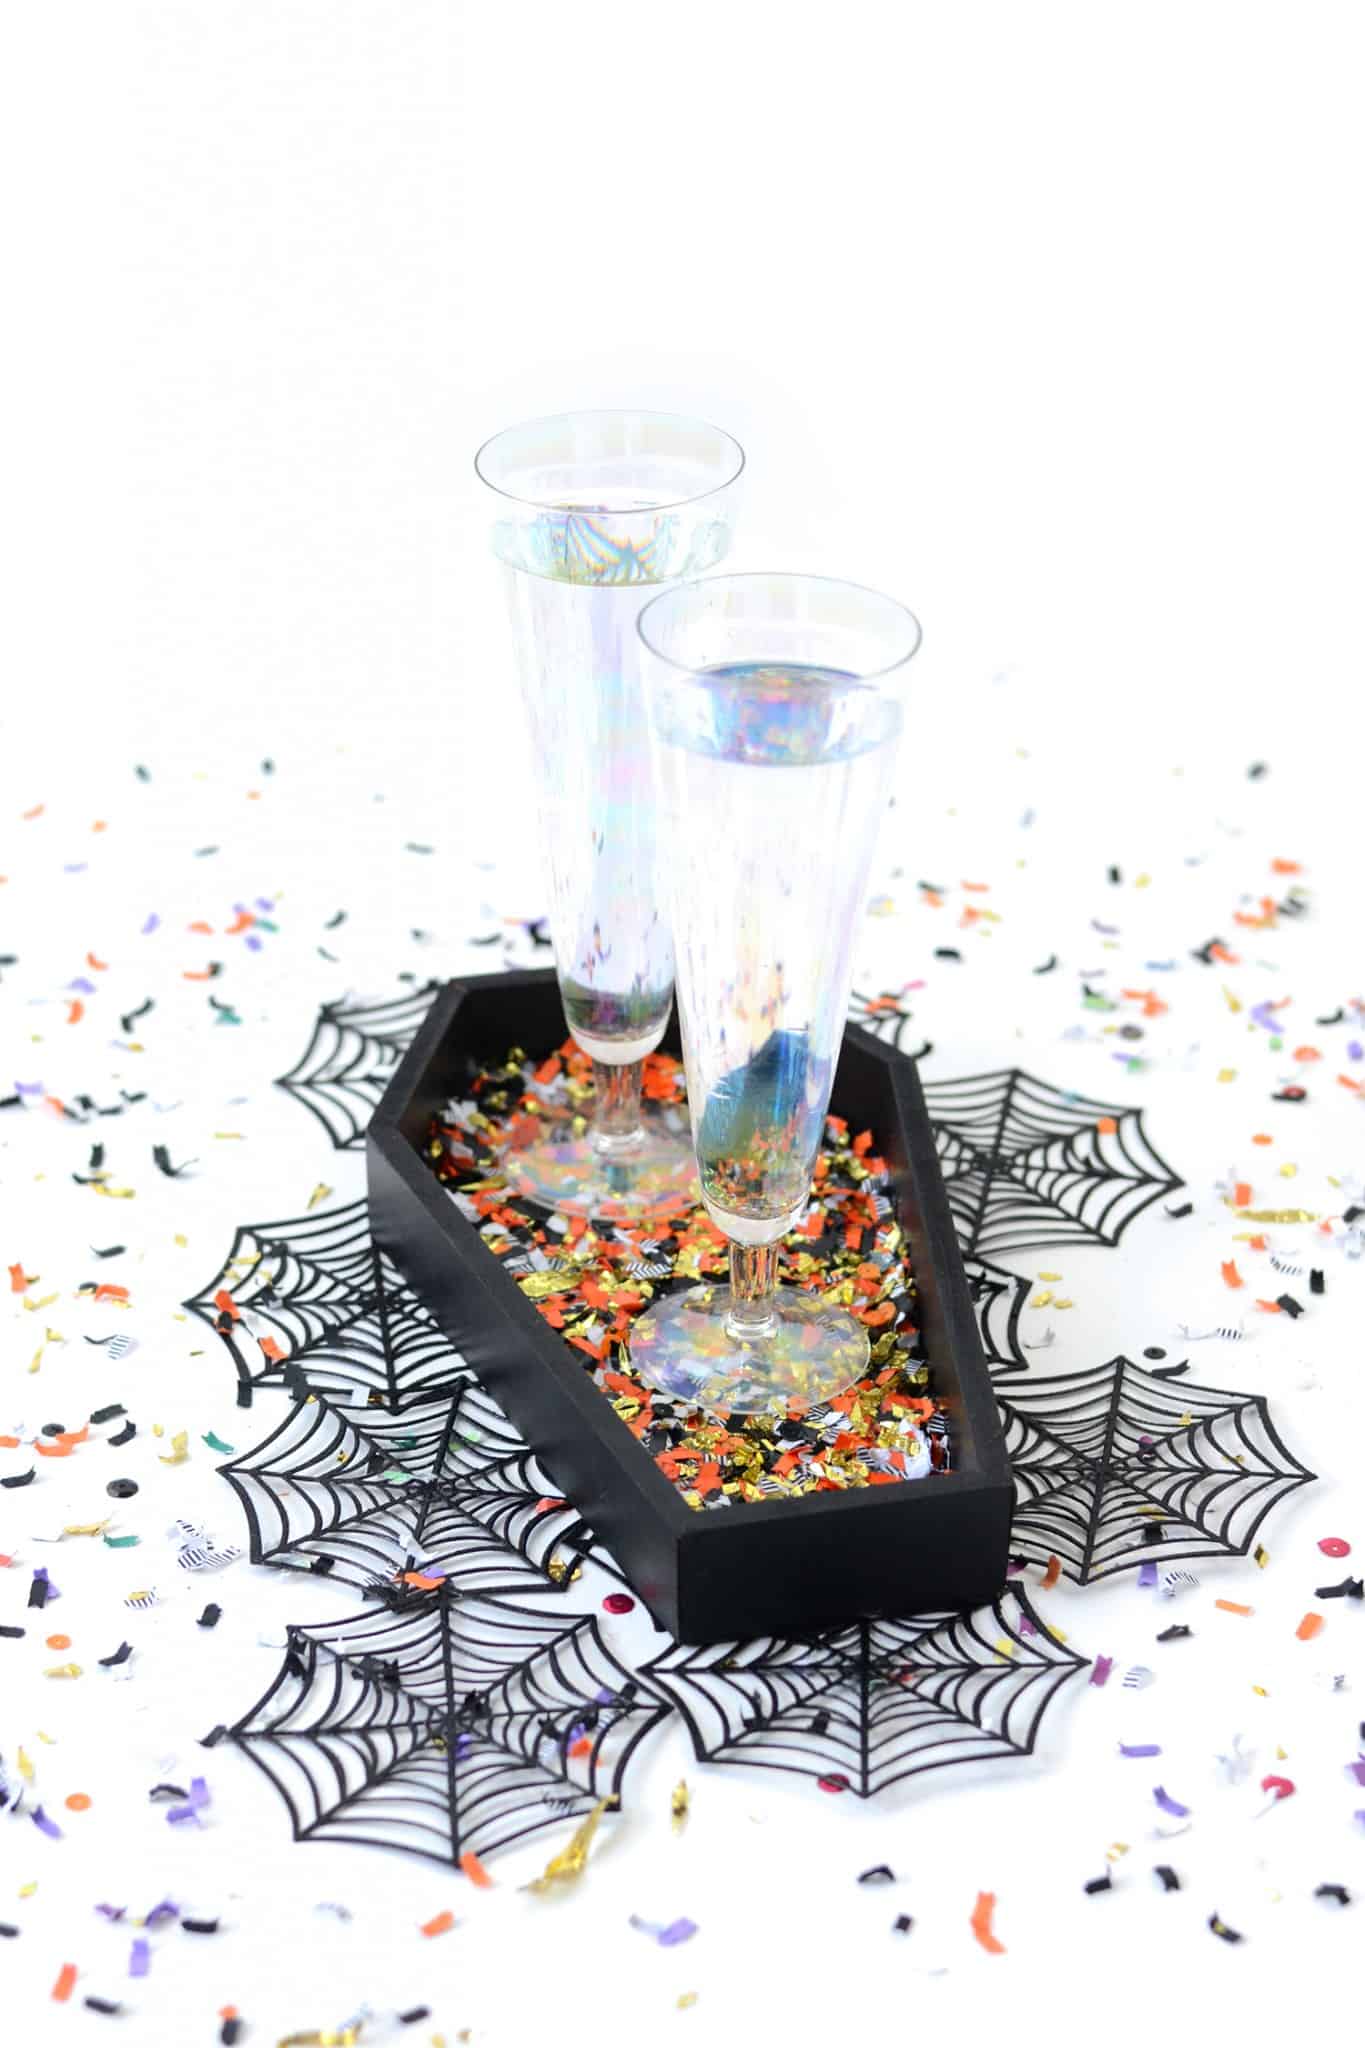 Spice up your Halloween table with DIY confetti coffin tray! It makes the perfect decoration for your next holiday soirée. And who doesn't love confetti?!